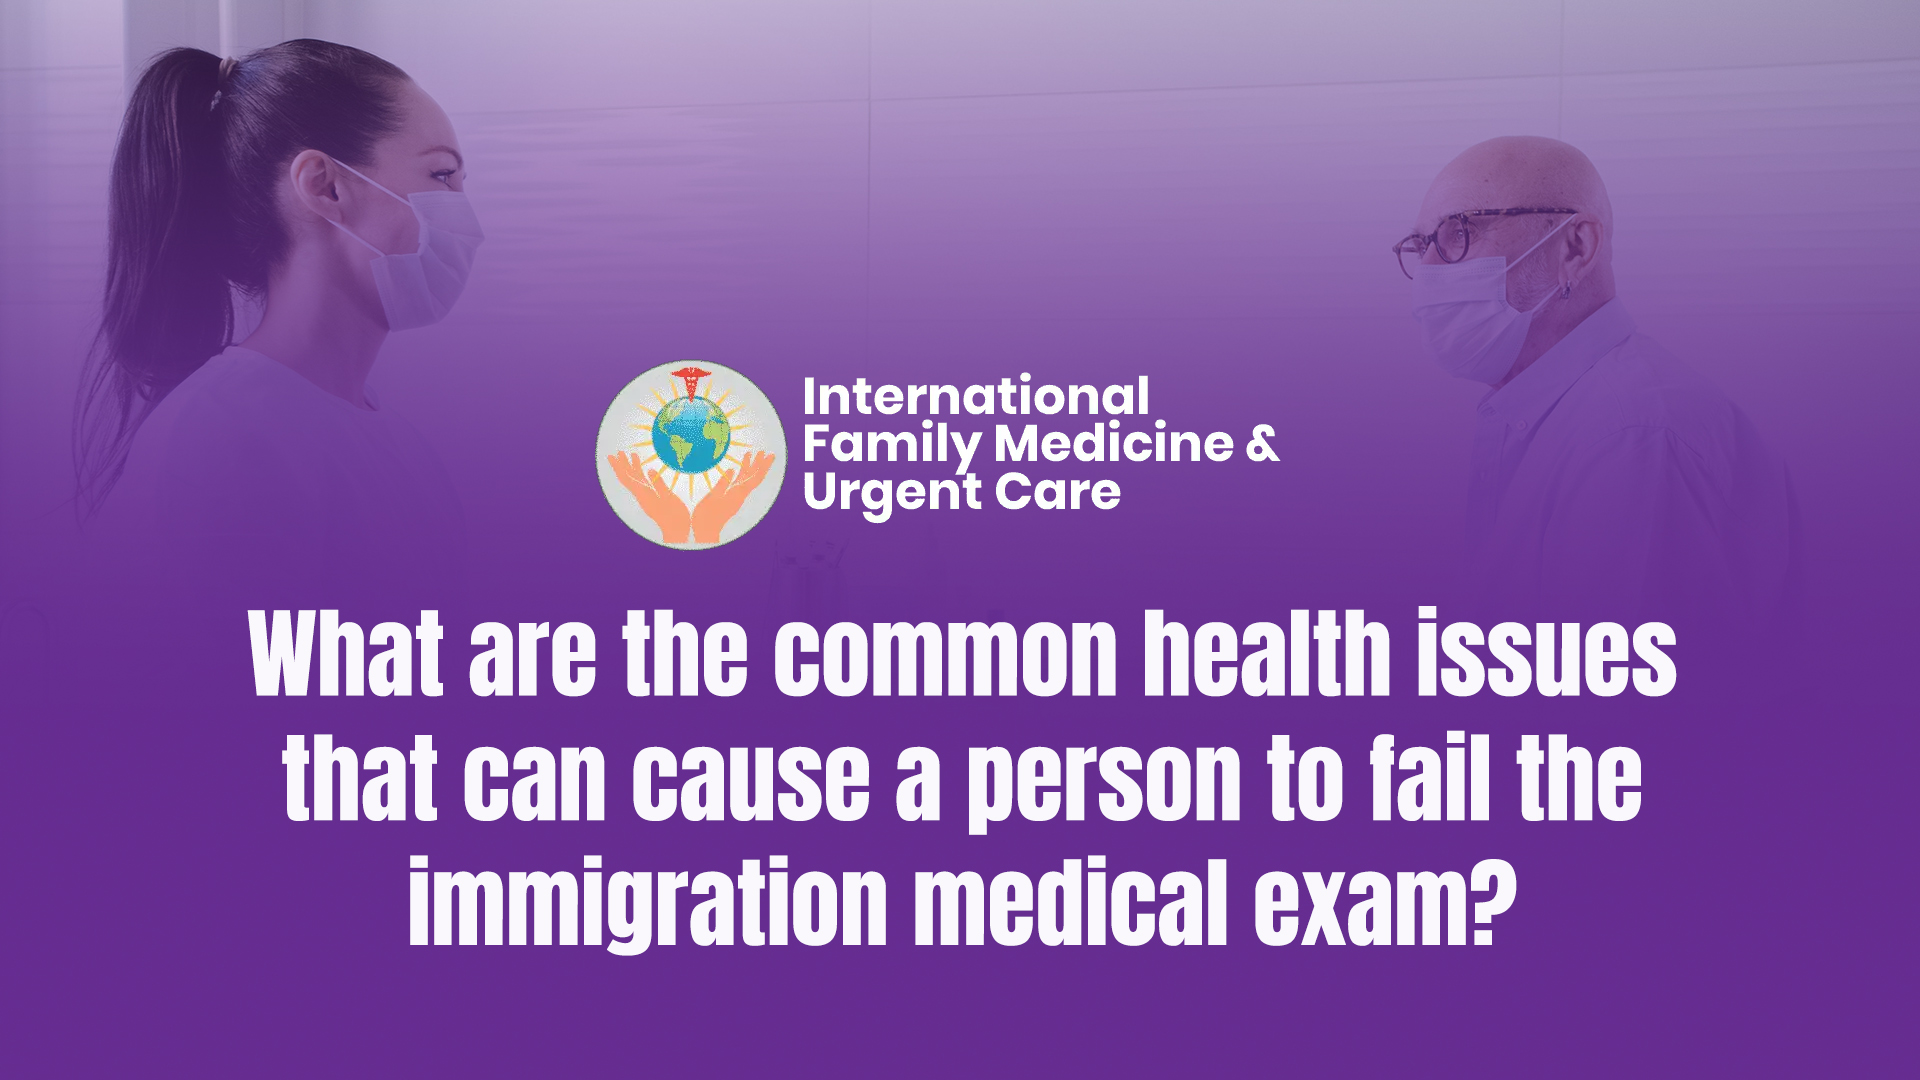 What are the common health issues that can cause a person to fail the immigration medical exam?